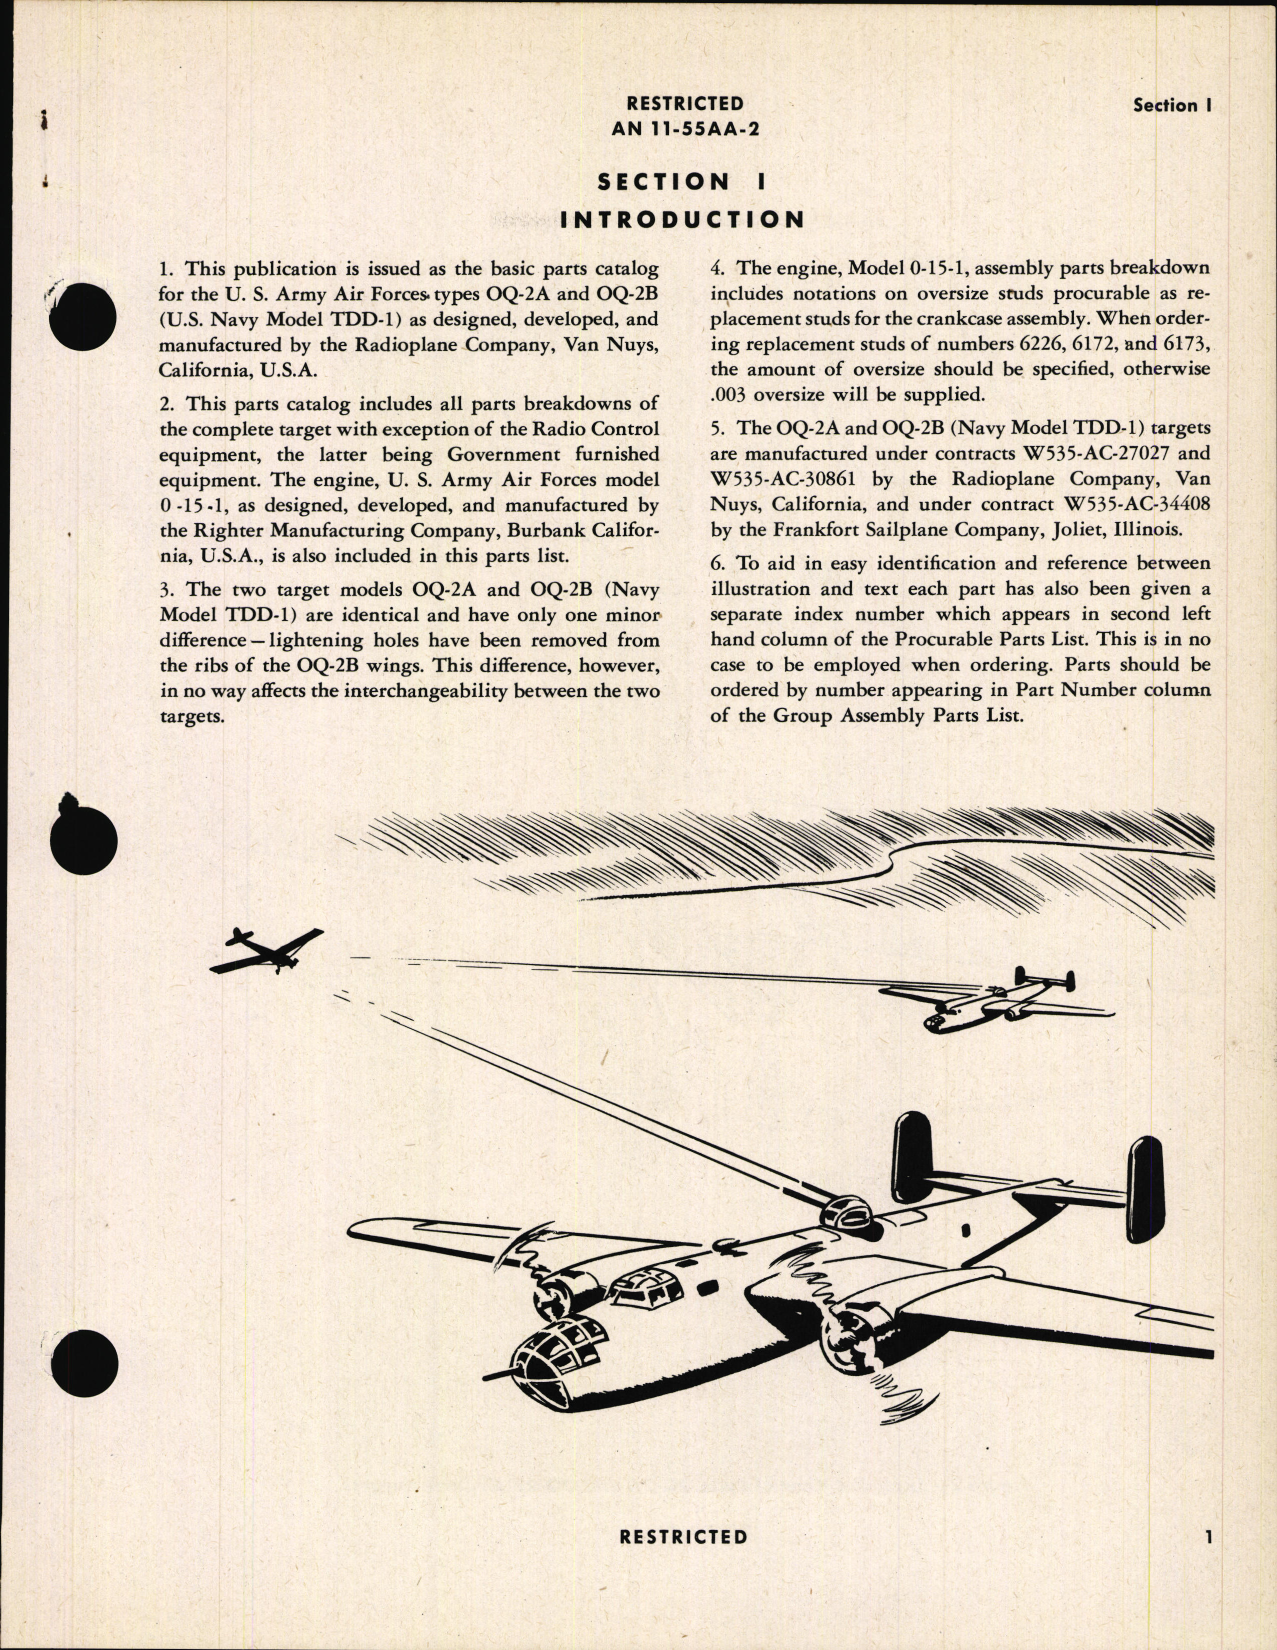 Sample page 5 from AirCorps Library document: Parts Catalog for Army Models OQ-2A, OQ-2B, and Navy Model TTD-1